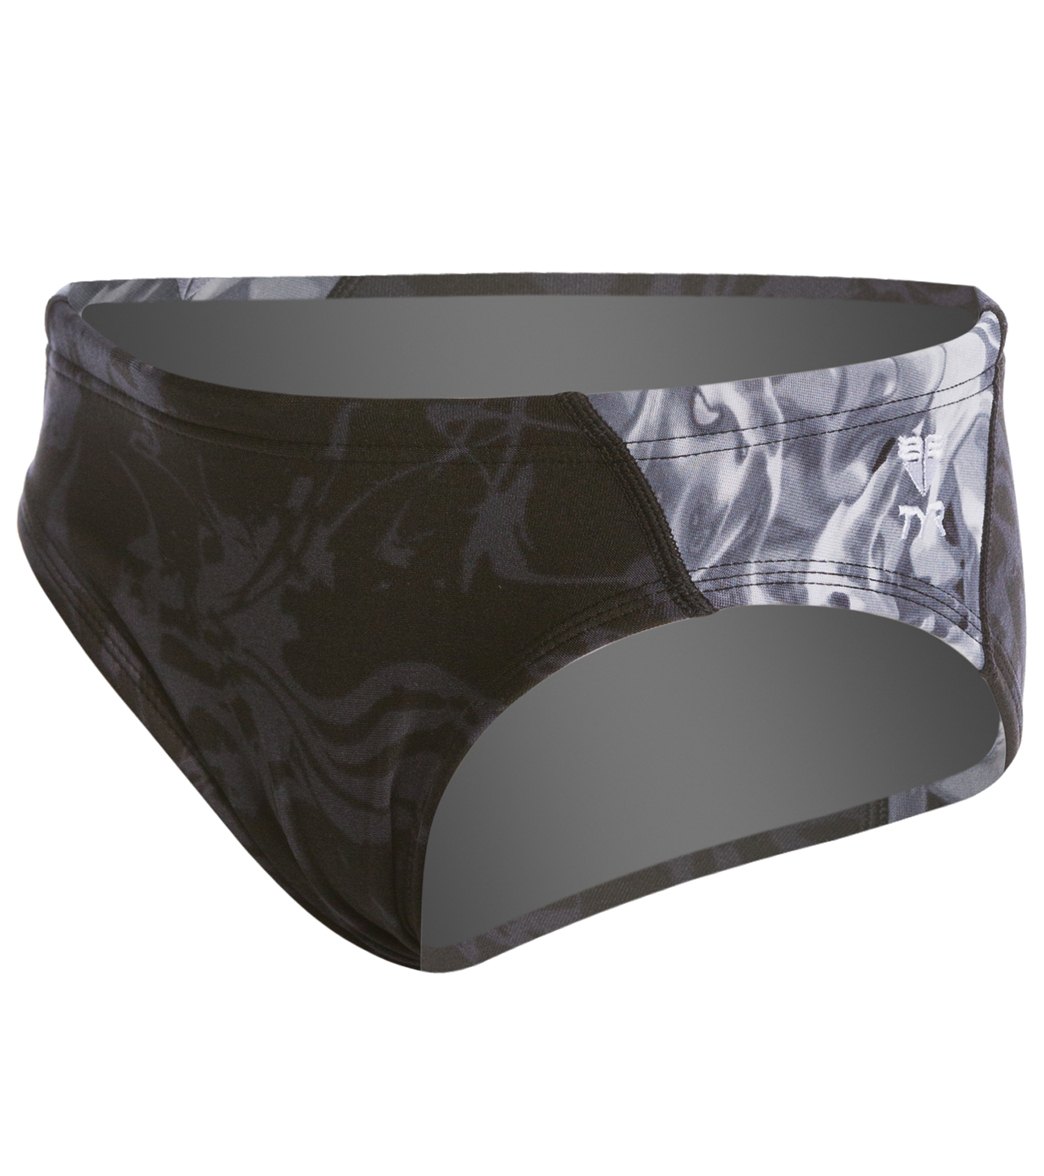 TYR Youth Ignis Blade Splice Racer Brief Swimsuit at SwimOutlet.com